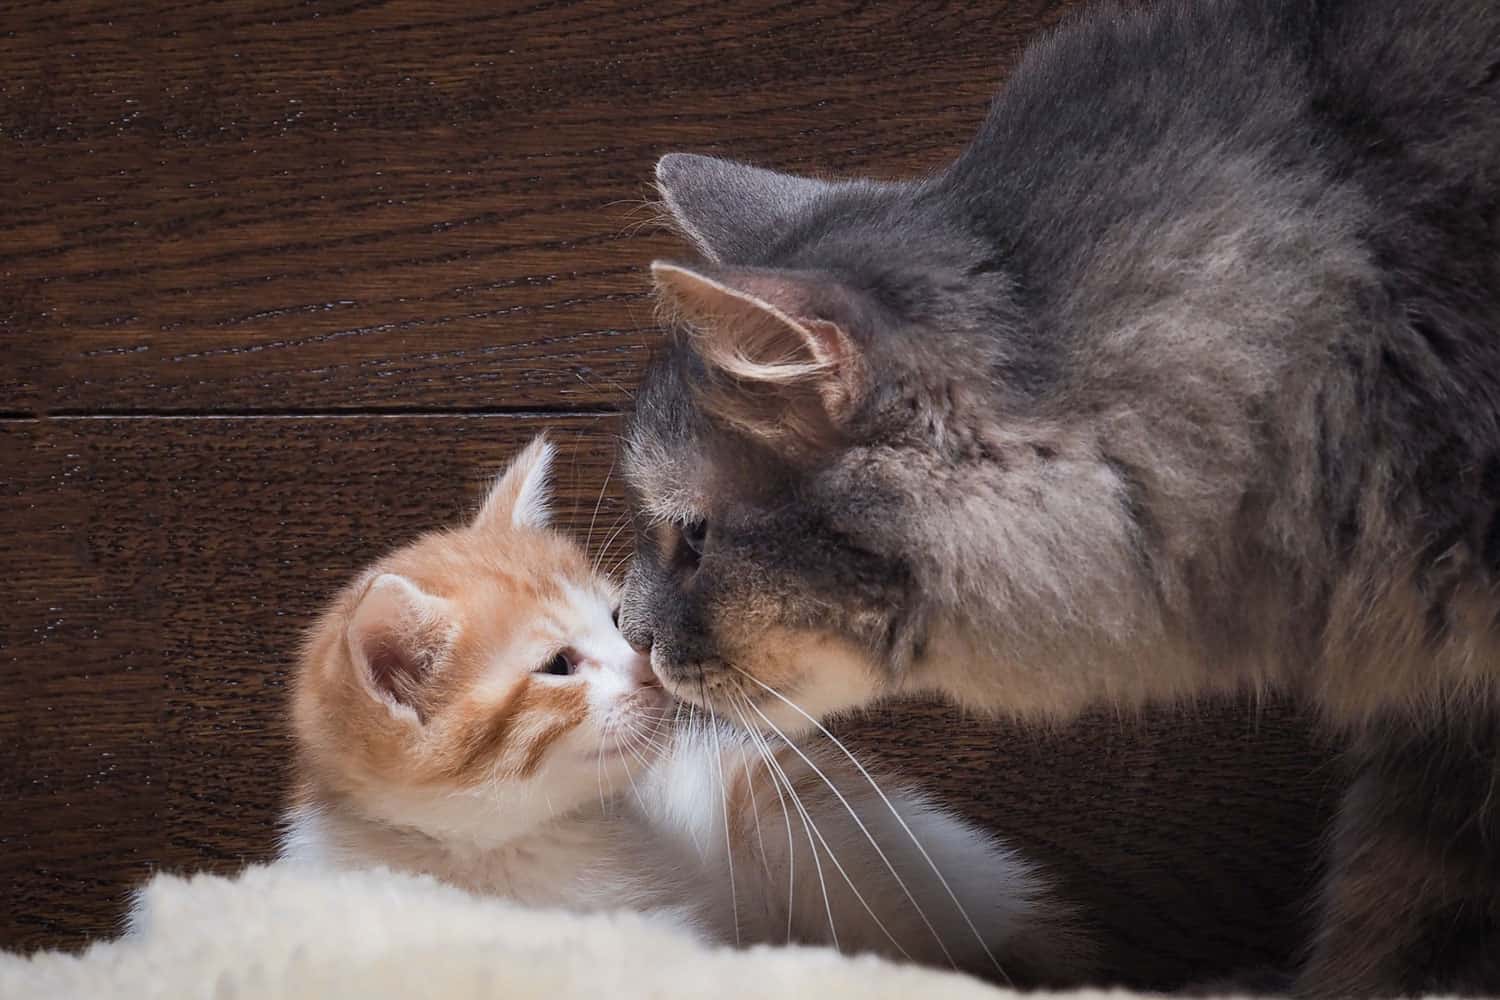 Cat and kitten. Mother and child. Cat kitten sniffing, nose to nose. Love, family, affection. The cat is gray, fluffy. The kitten is small, white and red. Background board.
